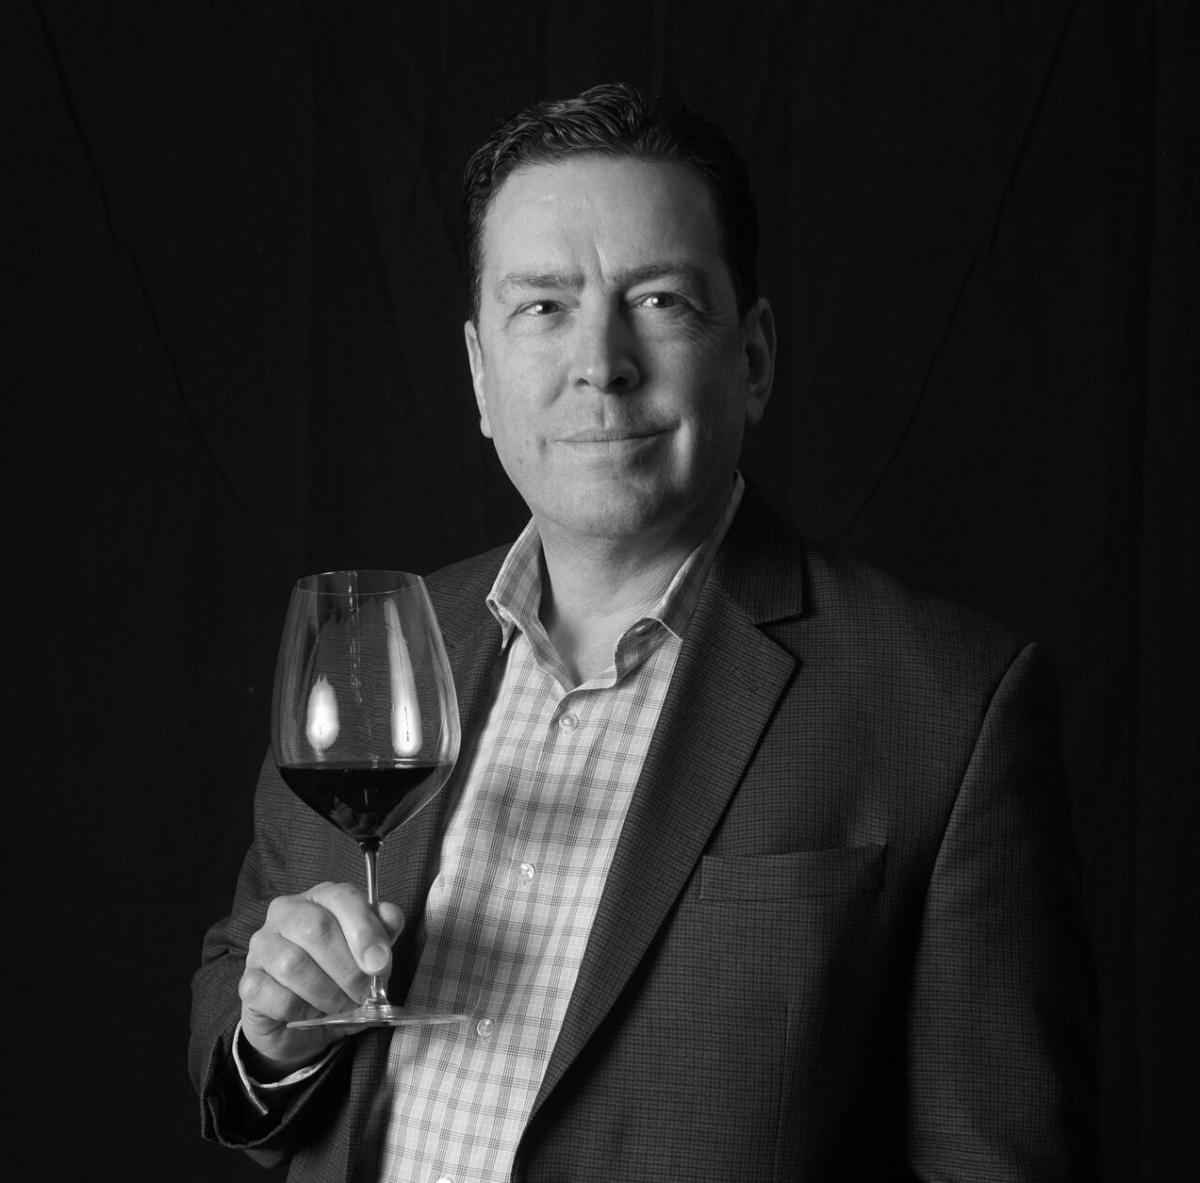 Black and white photo of Lars Leicht holding a glass of wine.